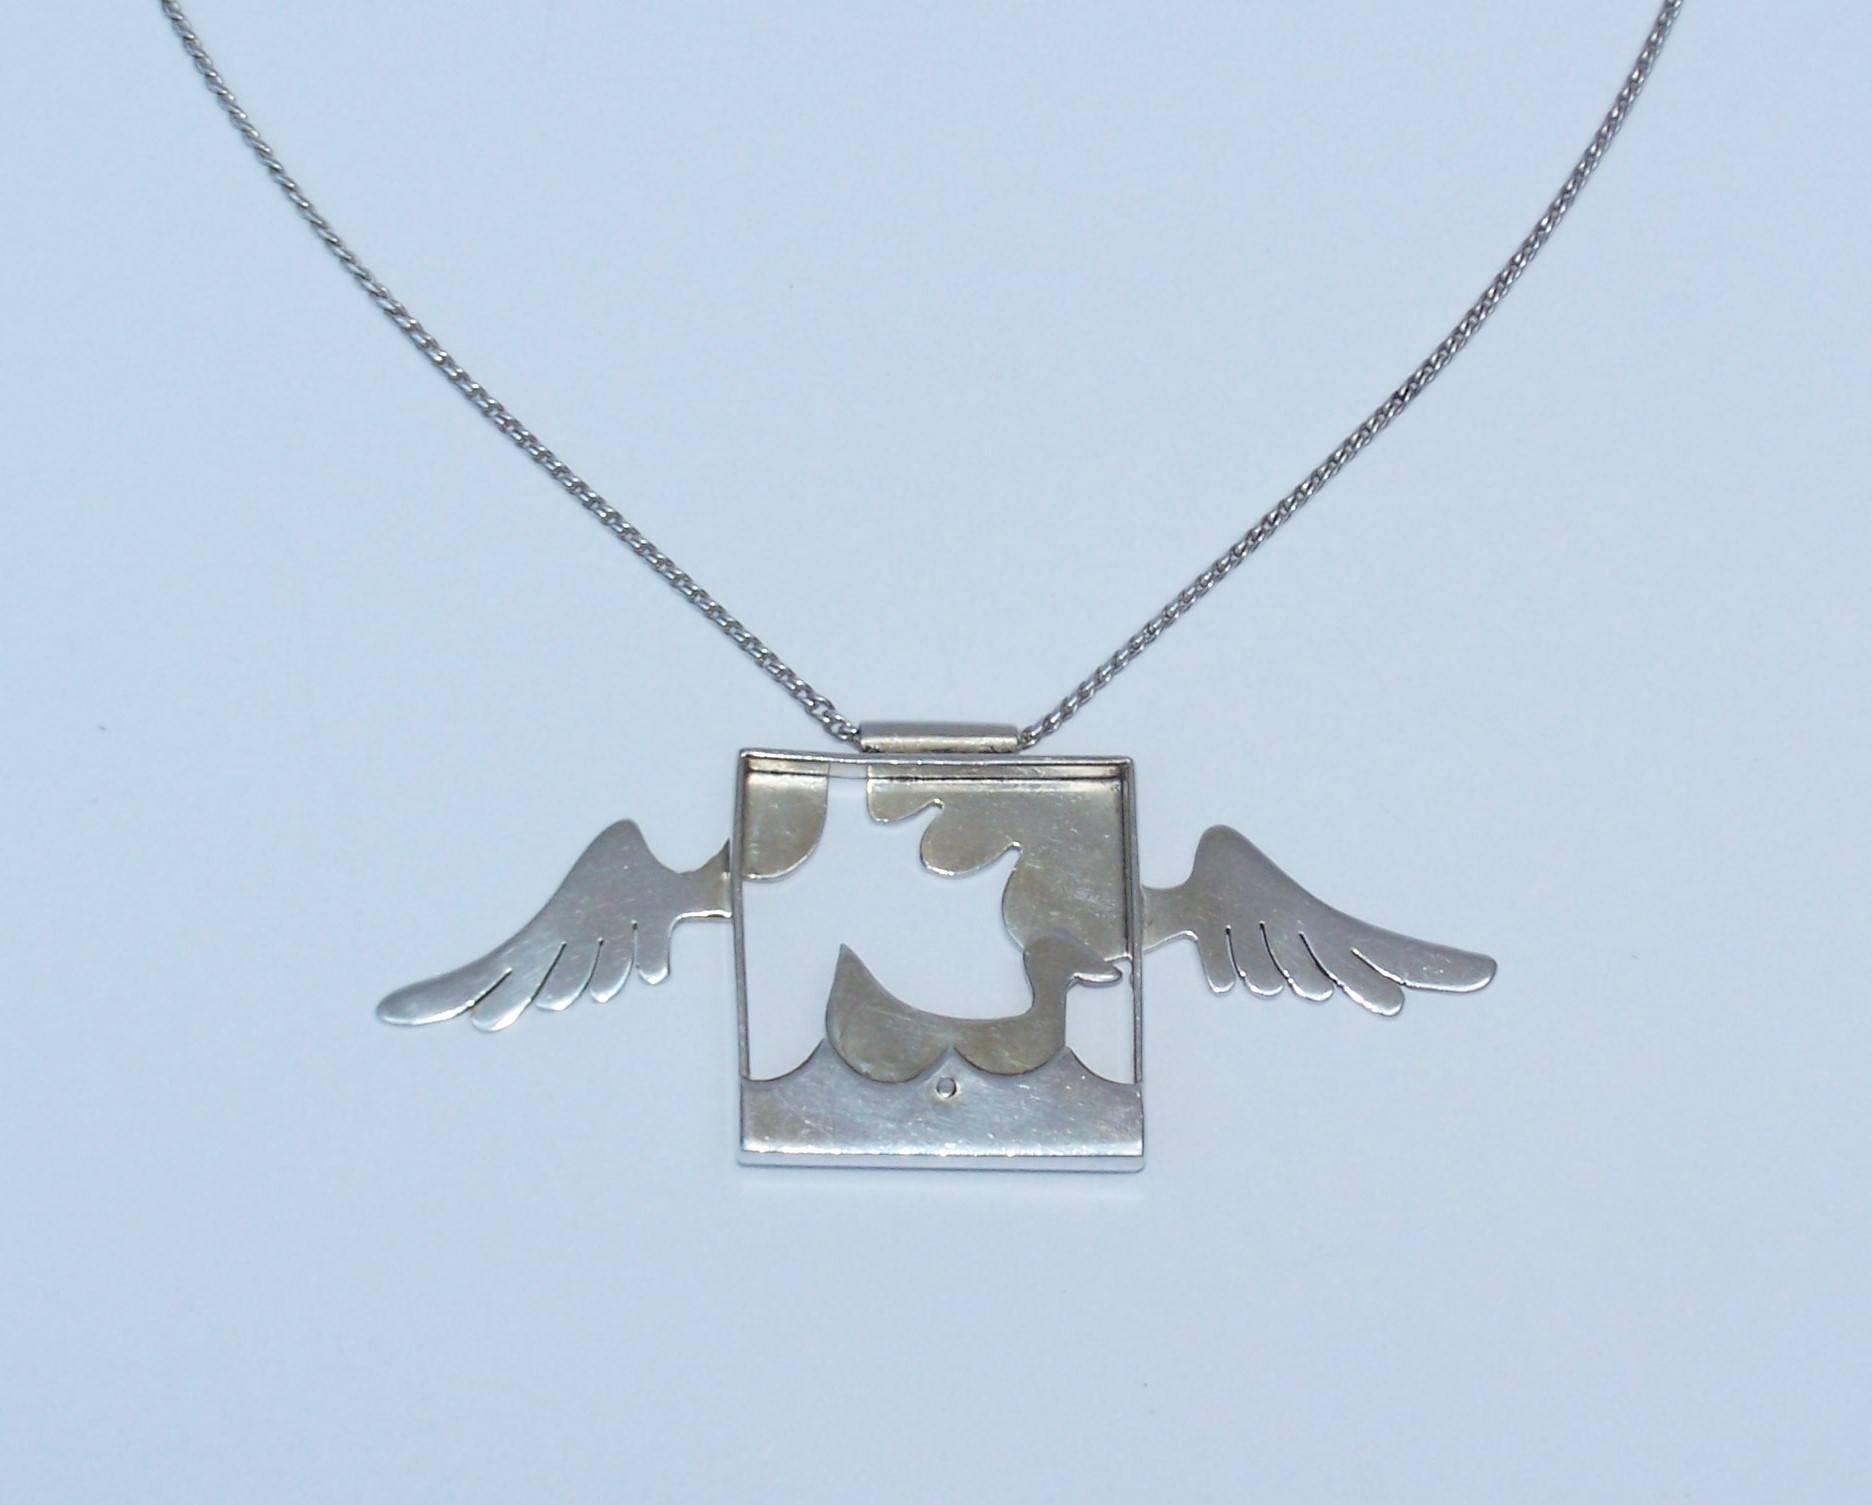 This 1970's sterling silver necklace combines whimsical articulated motion with surreal imagery to create a fun piece of fashion jewelry.  The 3-D style 3.5" x 1.38" pendant features a framed duck floating on water with a hinged joint